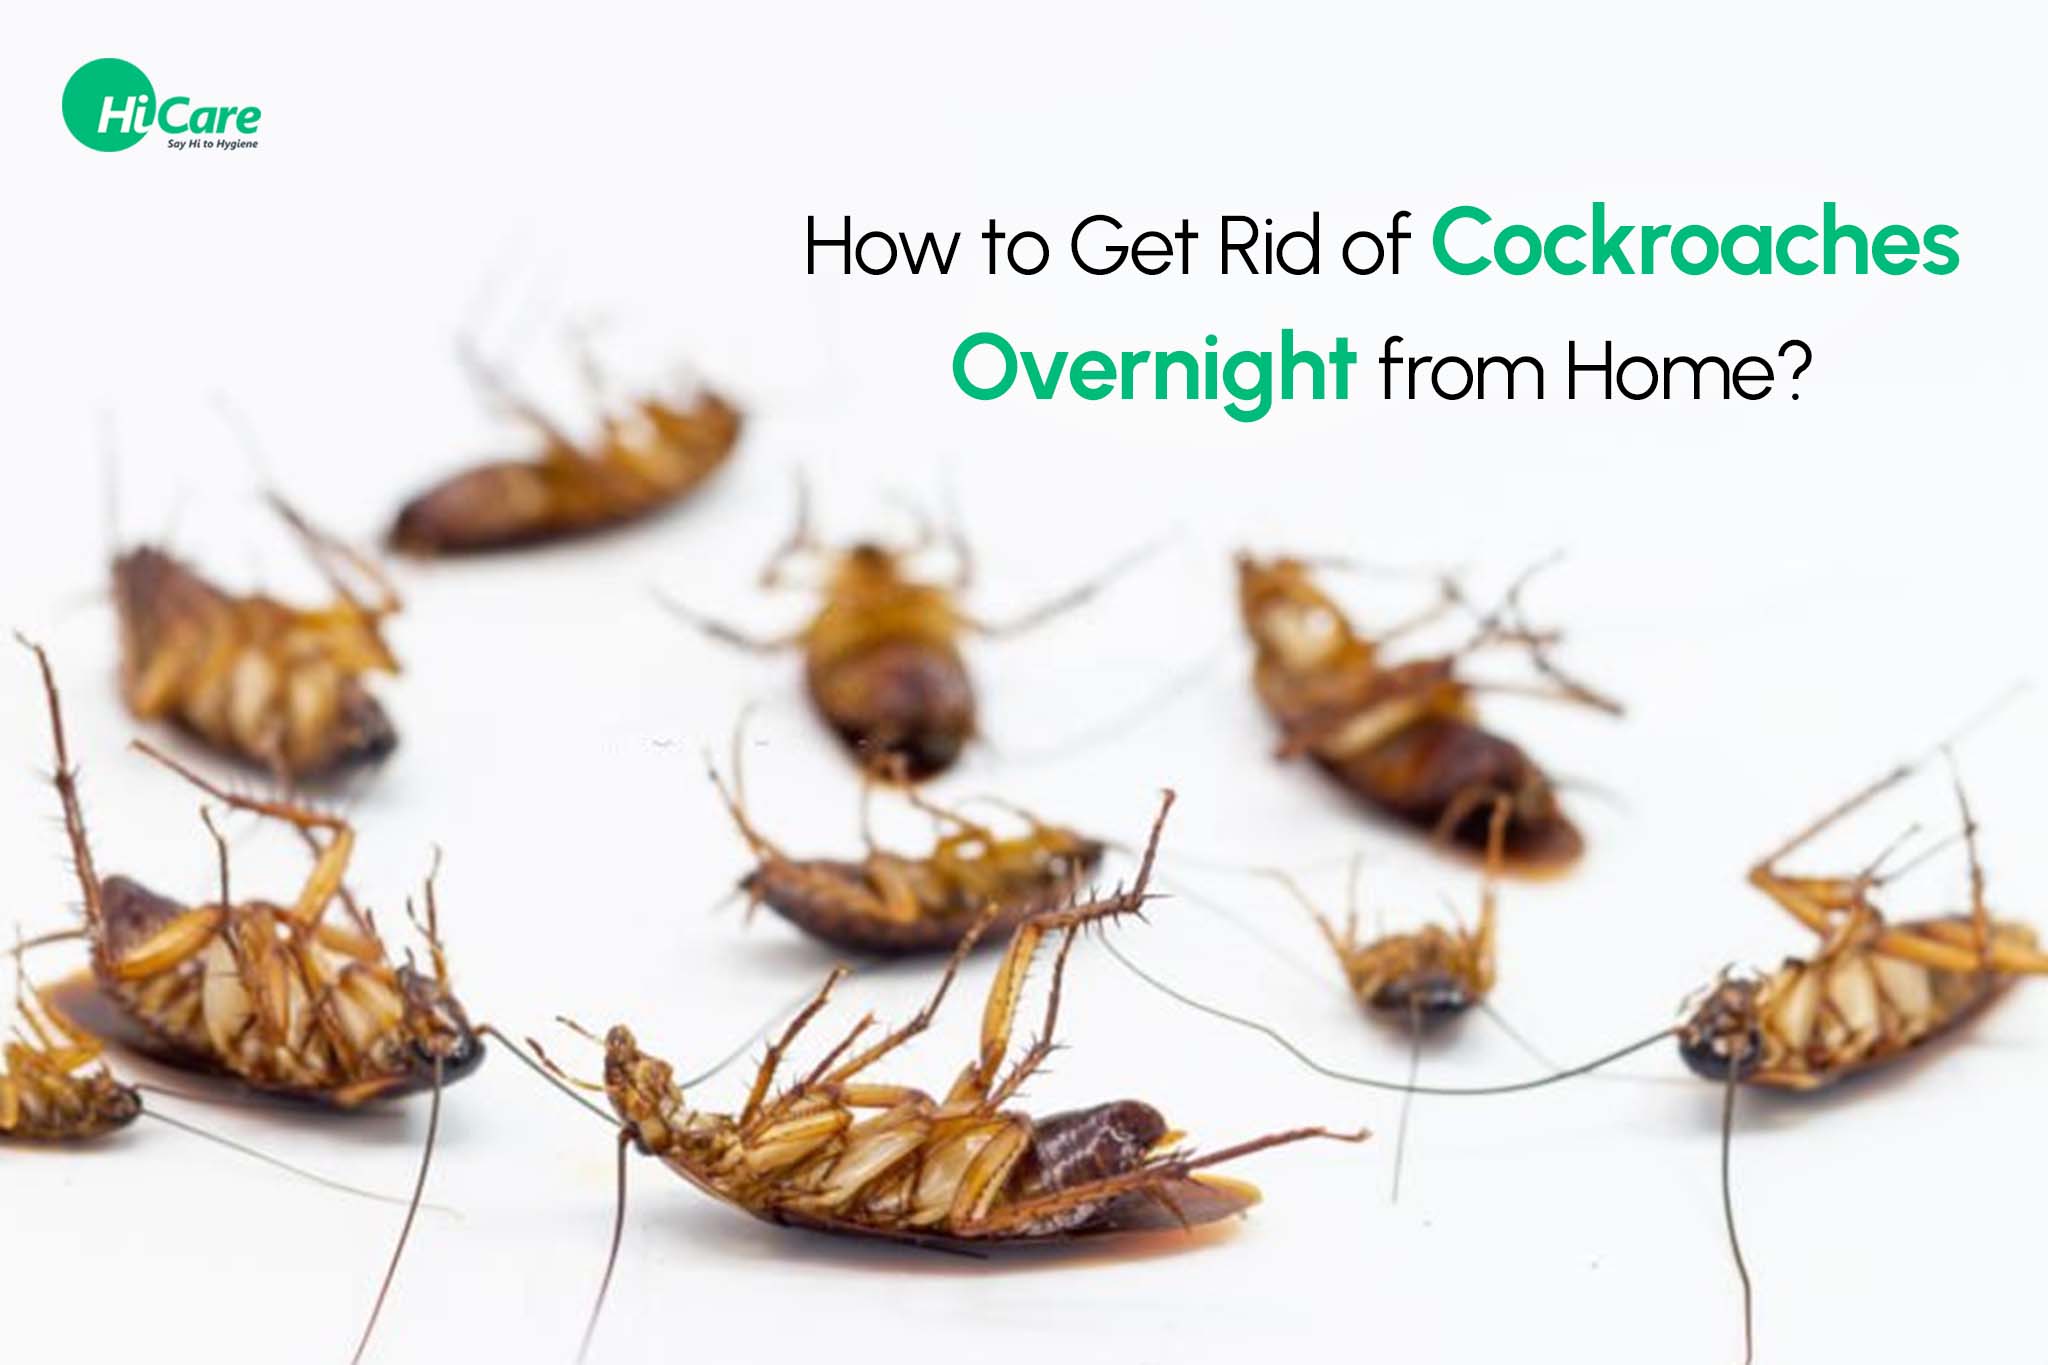 How to Get Rid of Cockroaches Overnight from Home?